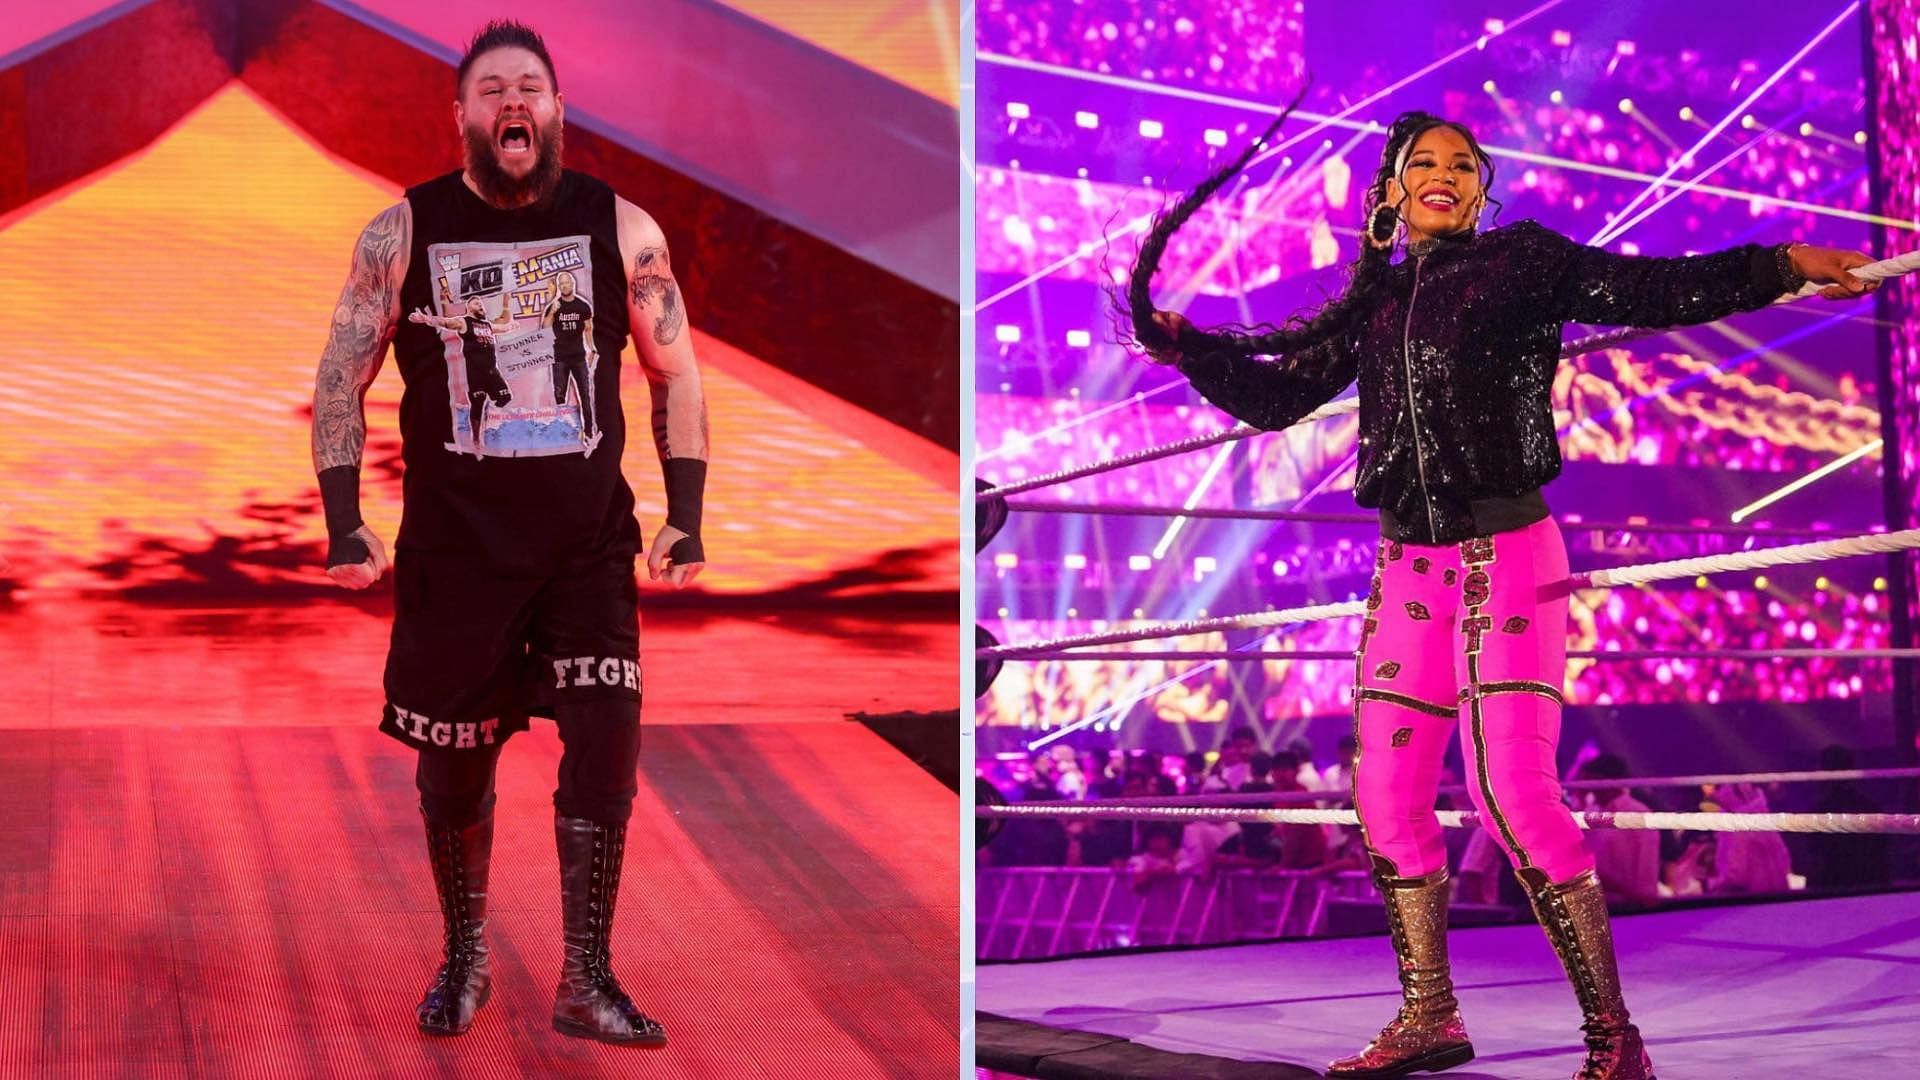 Four full-length shows are coming to WWE Network &amp; Peacock